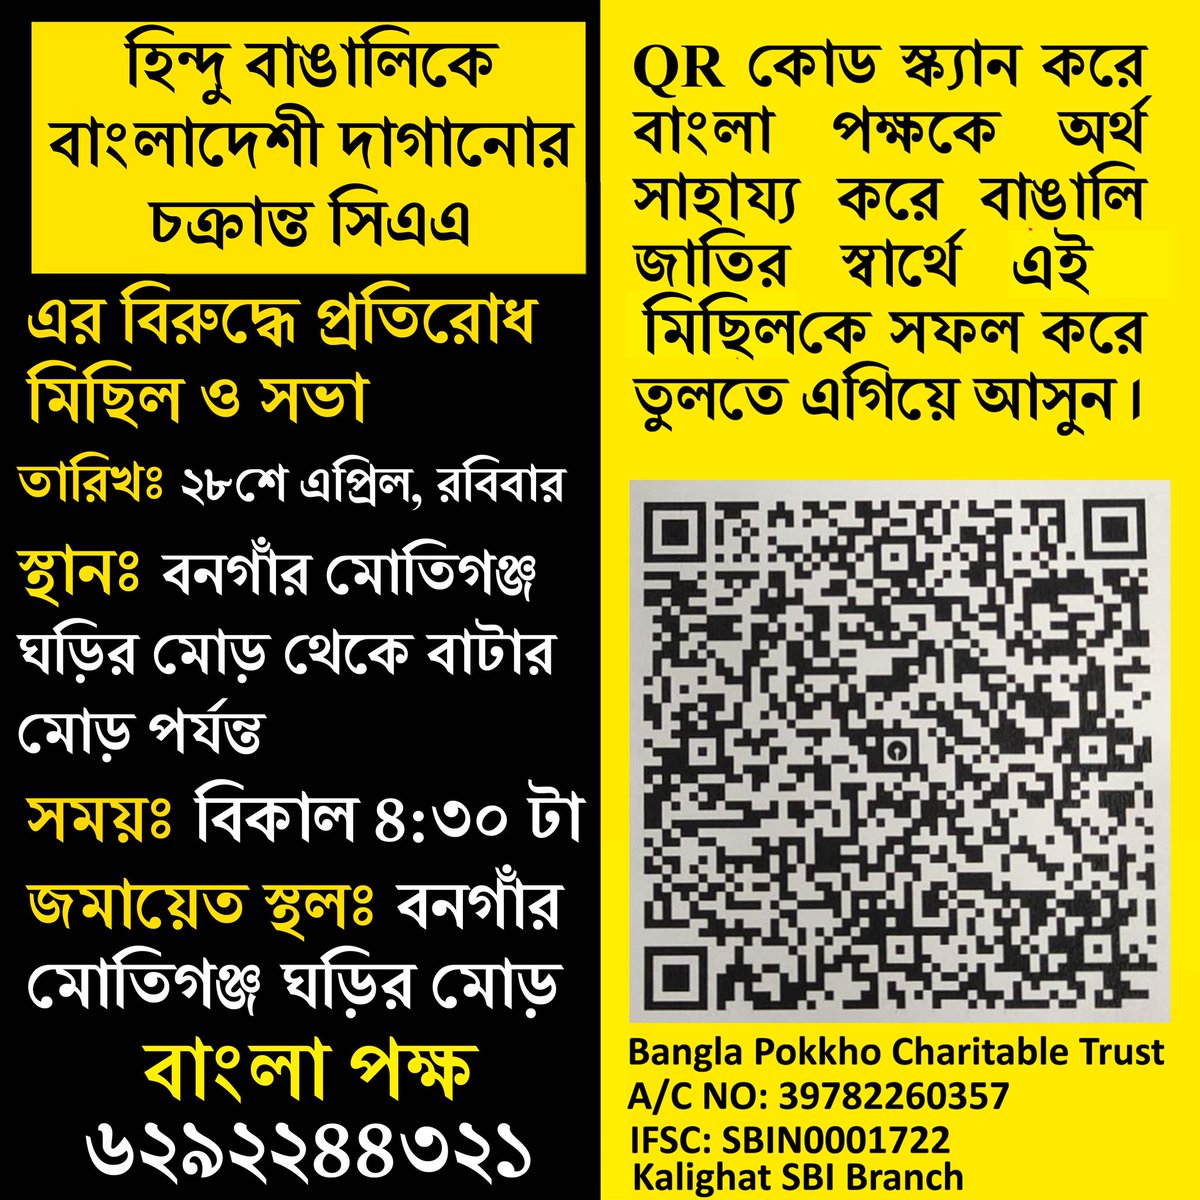 On 21 April, BJP goons attacked @BanglaPokkho meeting in Bongaon that was explaining the CAA rules line by line. Organizing Secretary @maiti_kausik was himself assaulted.
On 28 April, Bangla Pokkho is holding a rally & meeting at the exact same spot.
Donate to support the event.